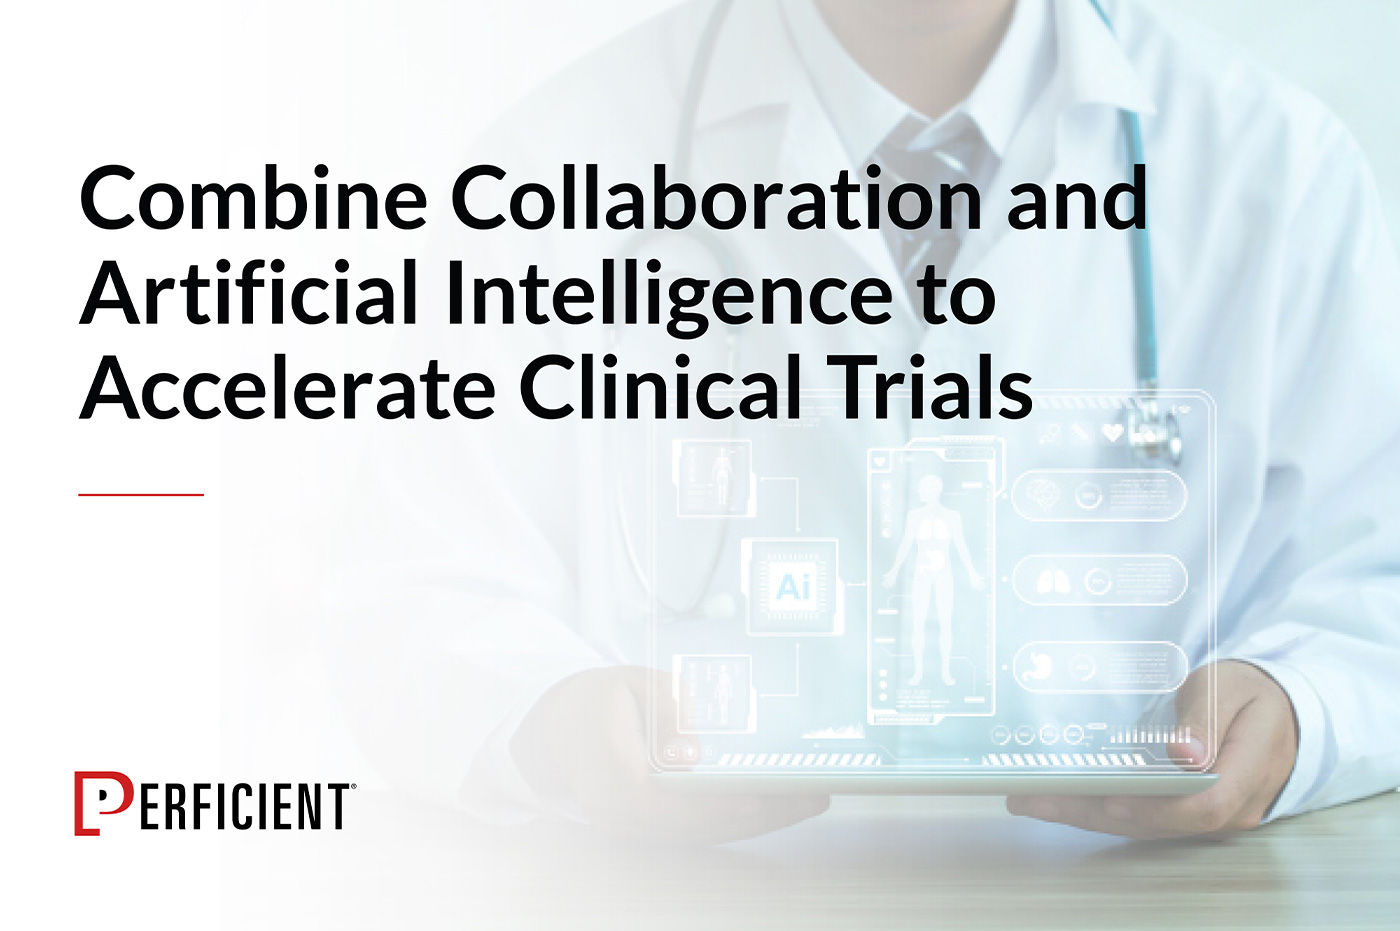 Combine Collaboration and Artificial Intelligence to Accelerate Clinical Trials